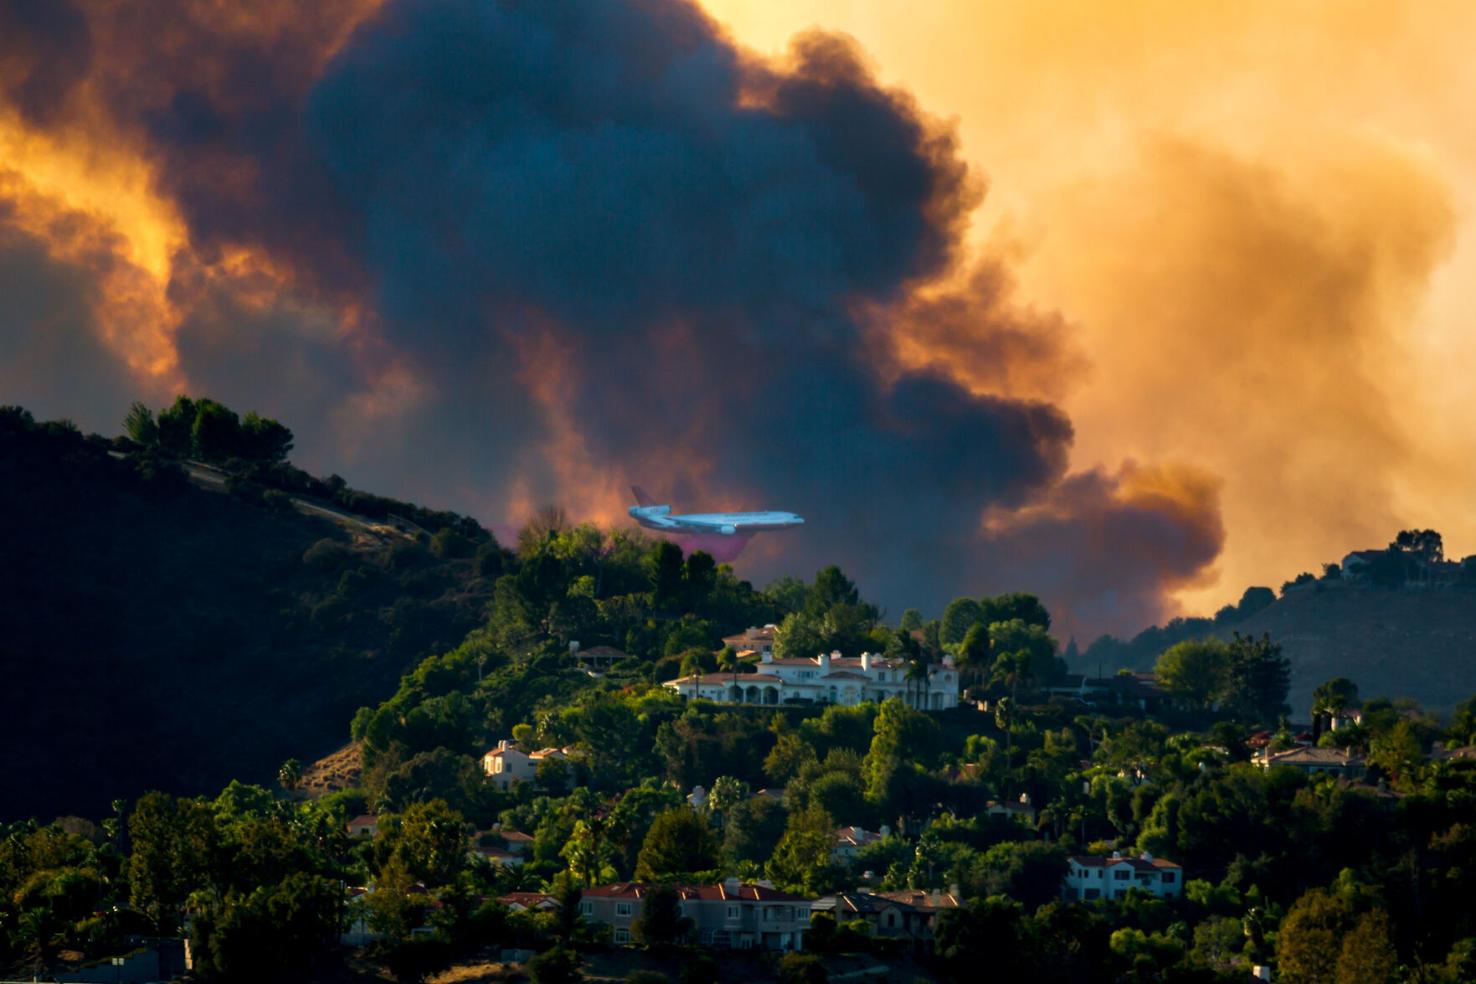 Southern California Edison Rates to Increase Significantly for Wildfire